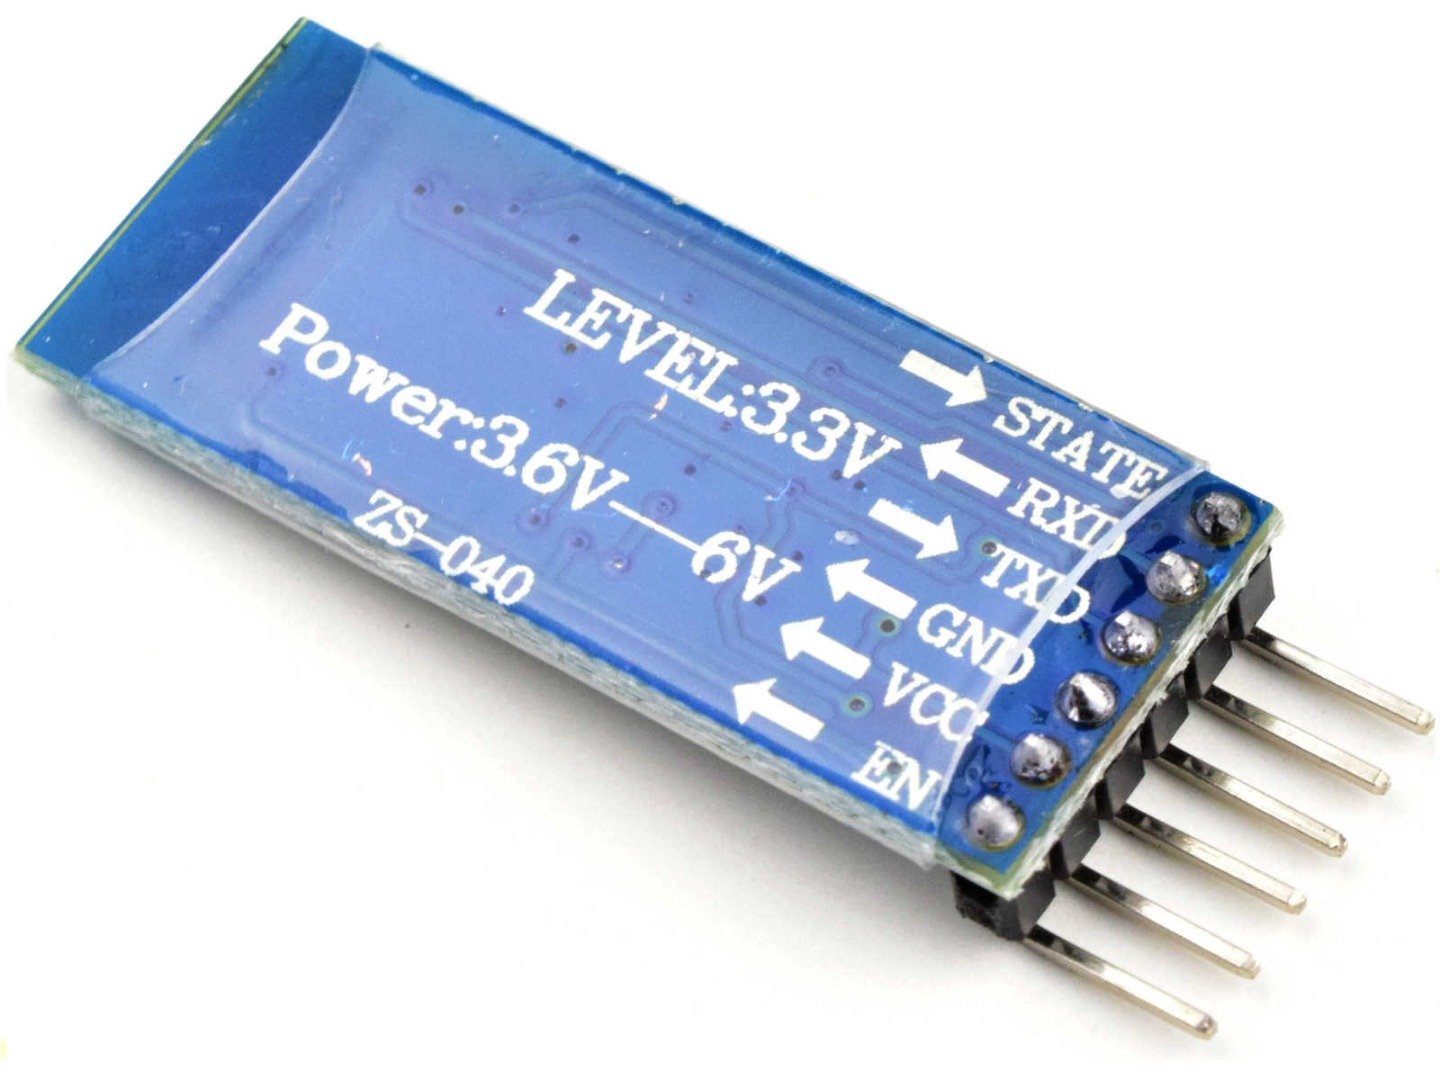 HM-10 Bluetooth 4.0 BLE Module with TI CC2541 chipset 10